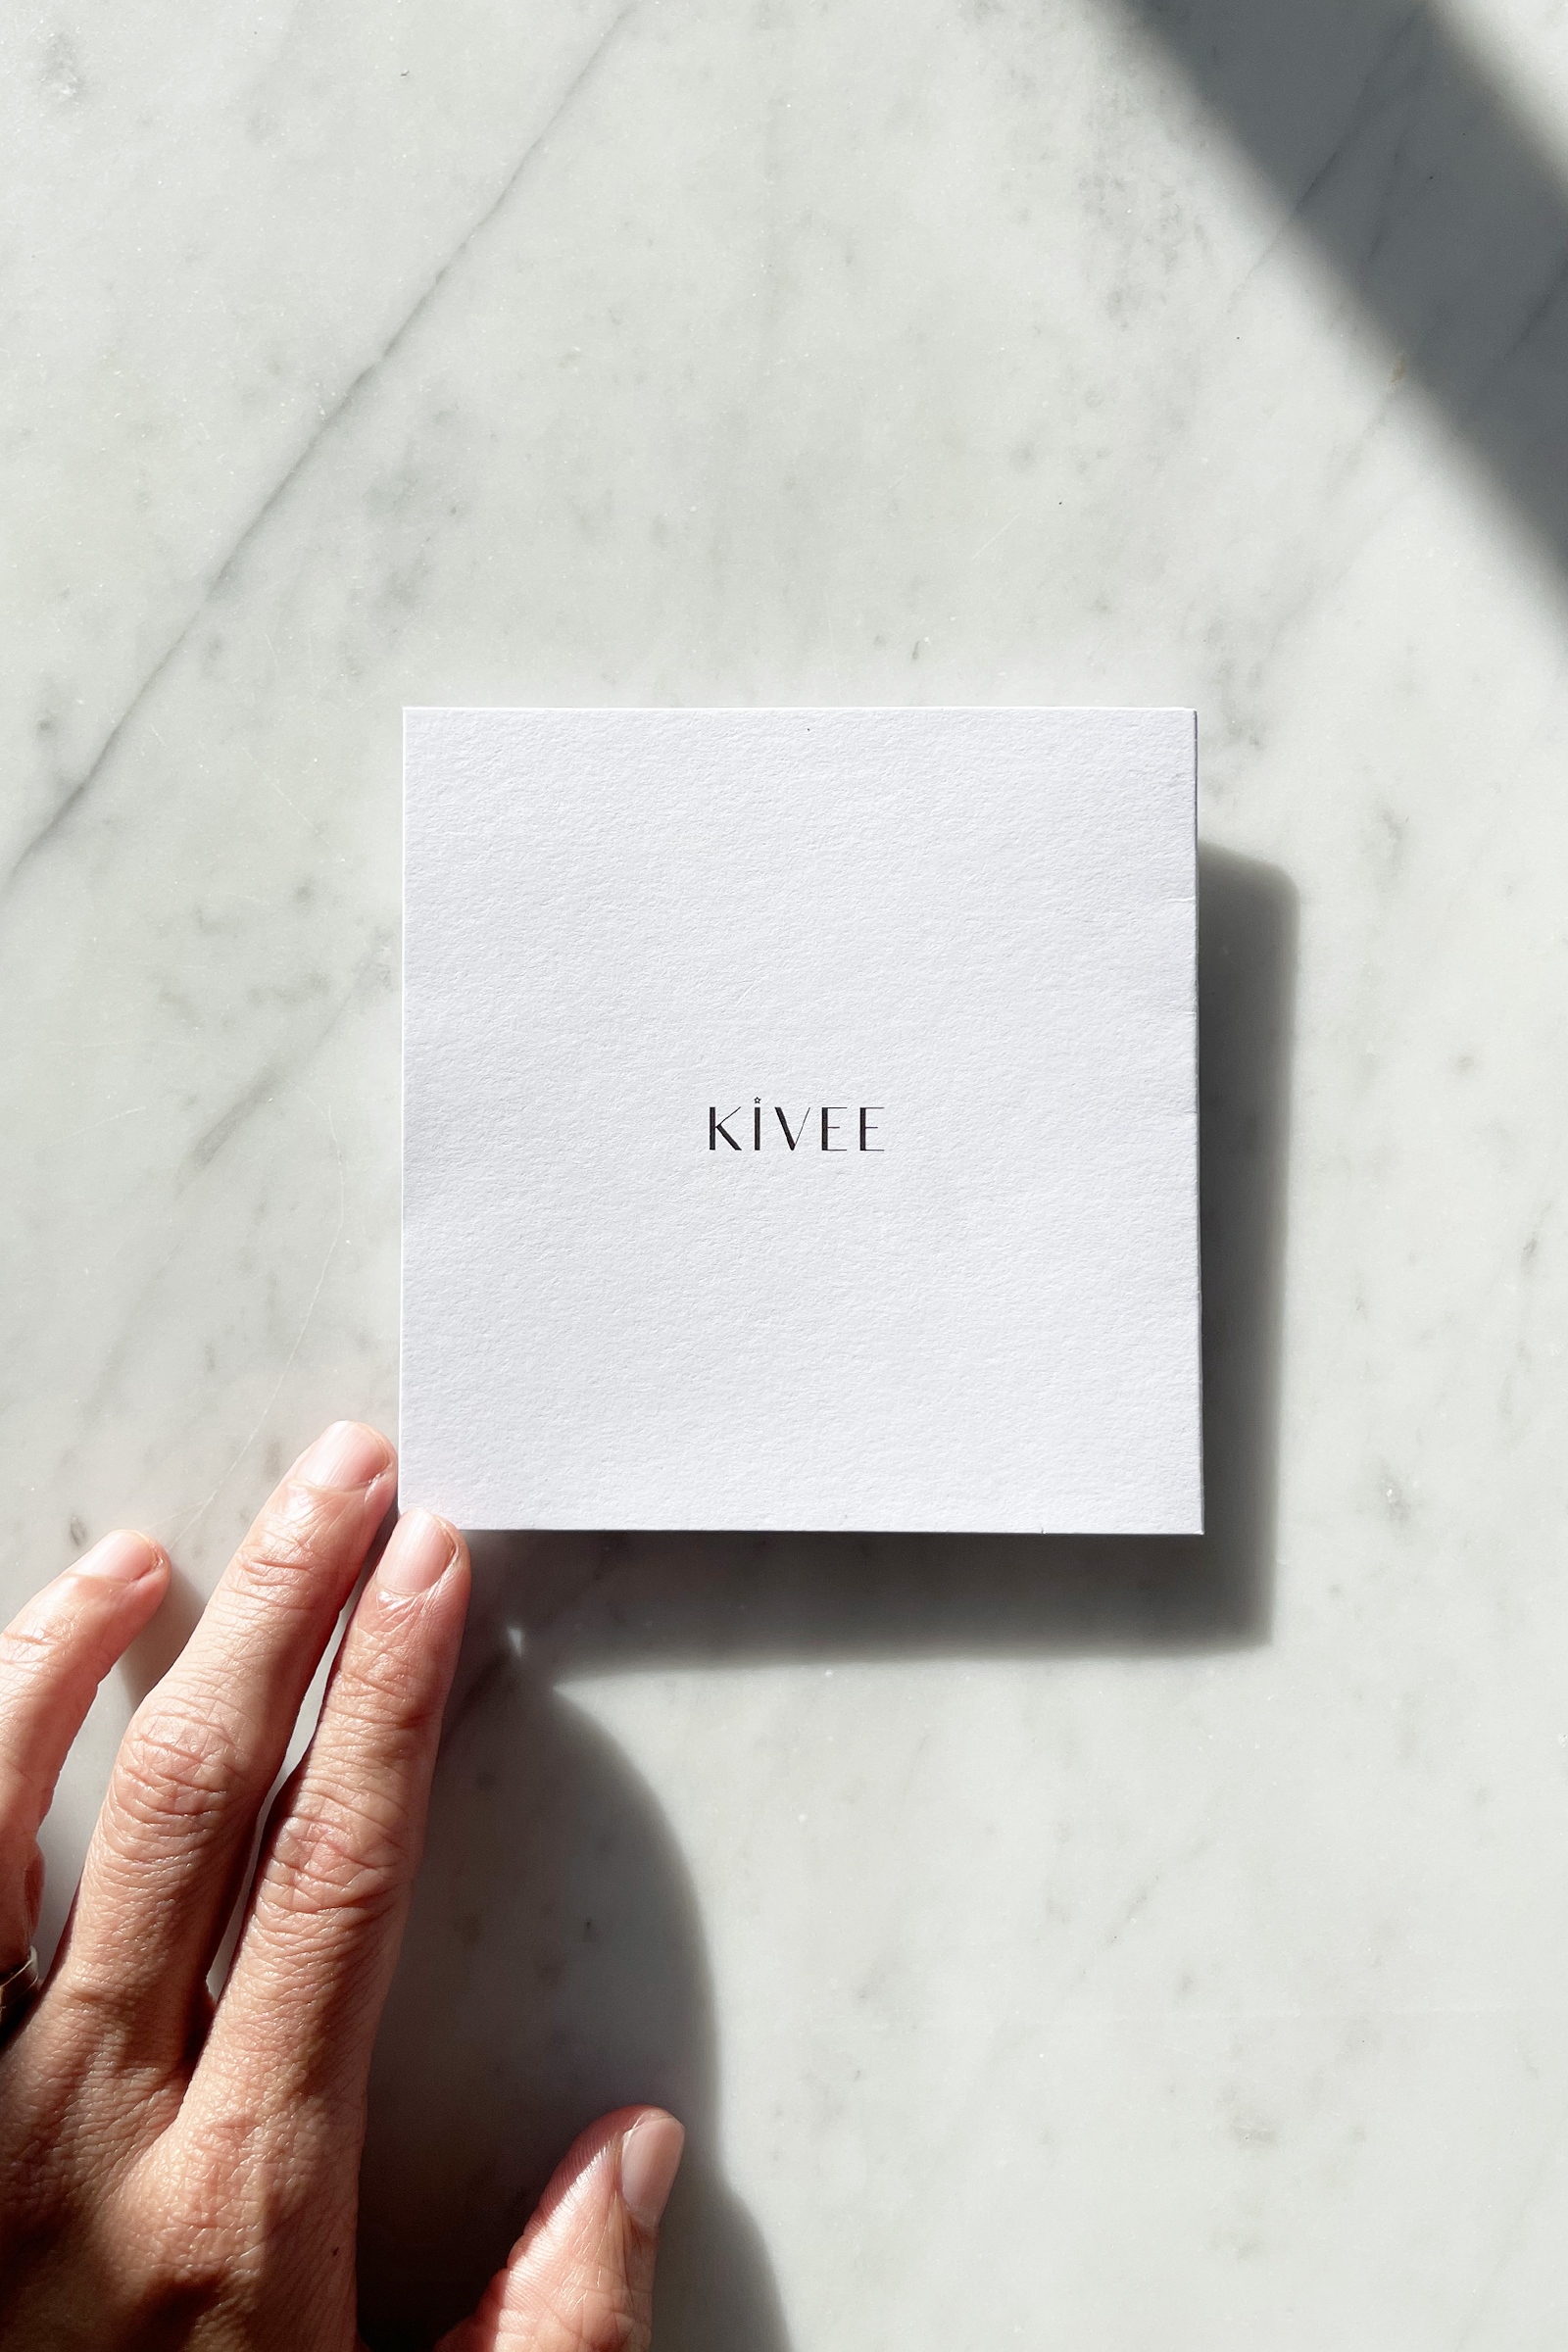 Picture of Kivee Gift Packaging with Greeting Card